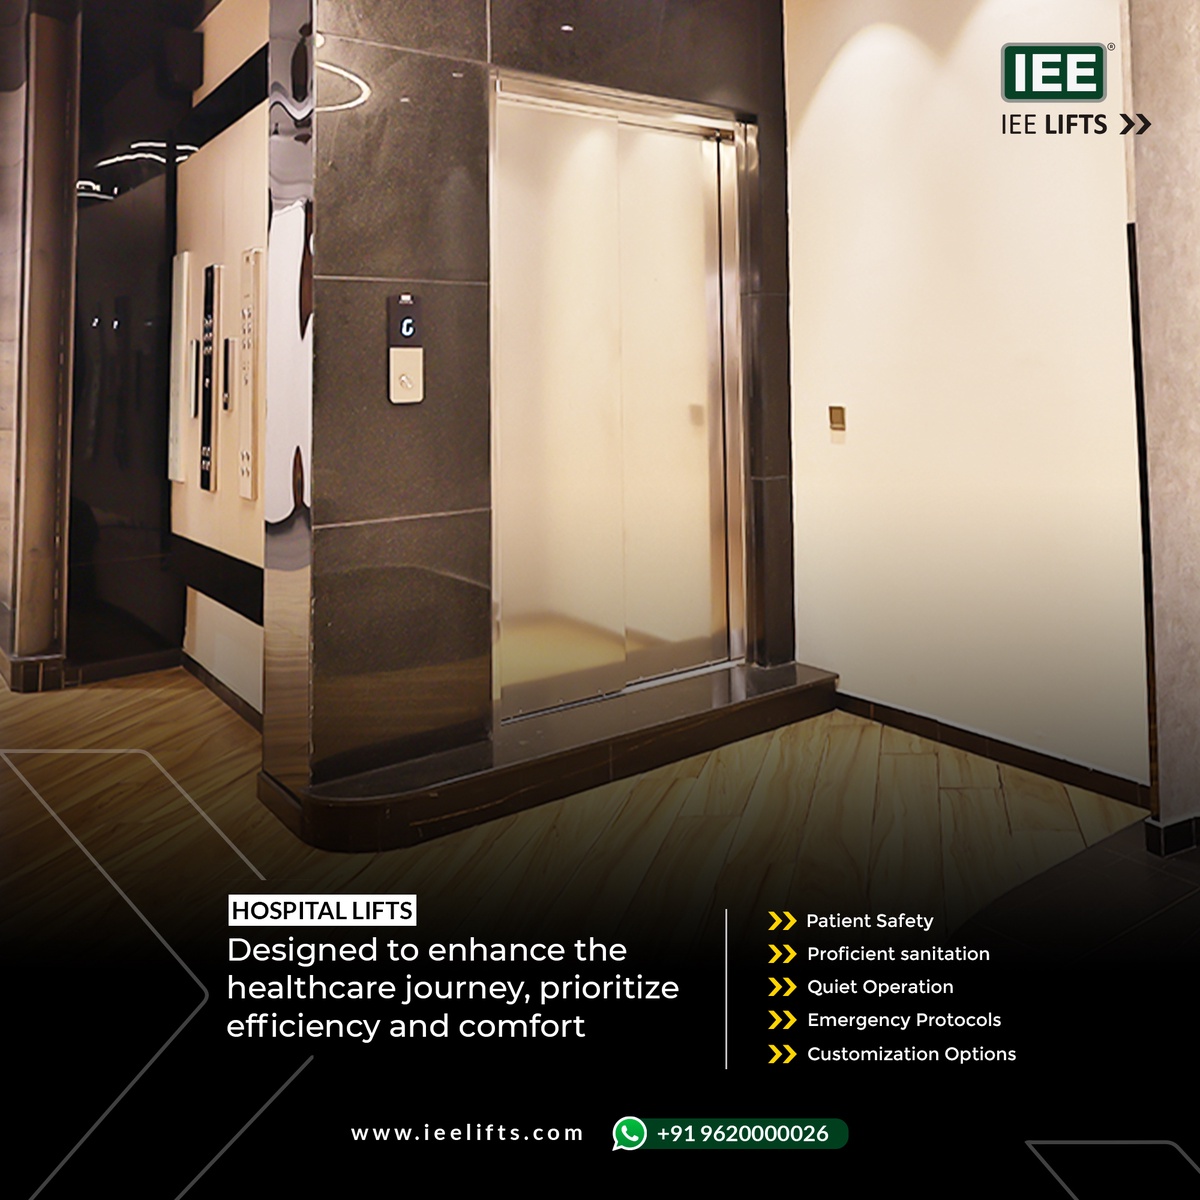 The Future Of Lifts - Efficient Navigation With Smart Maintenance